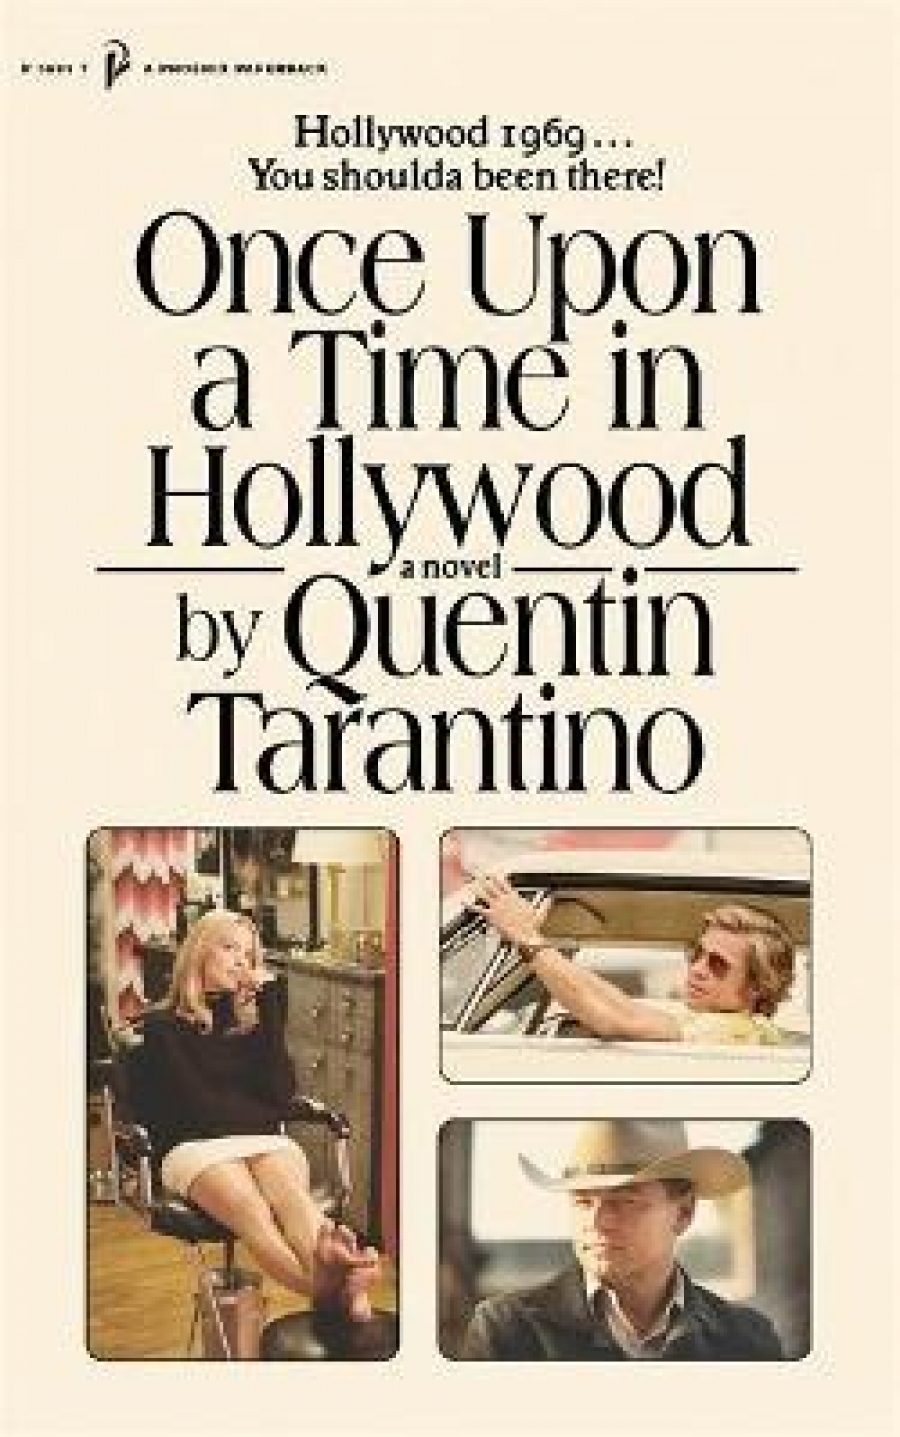 Tarantino, Quentin Once Upon a Time in Hollywood 